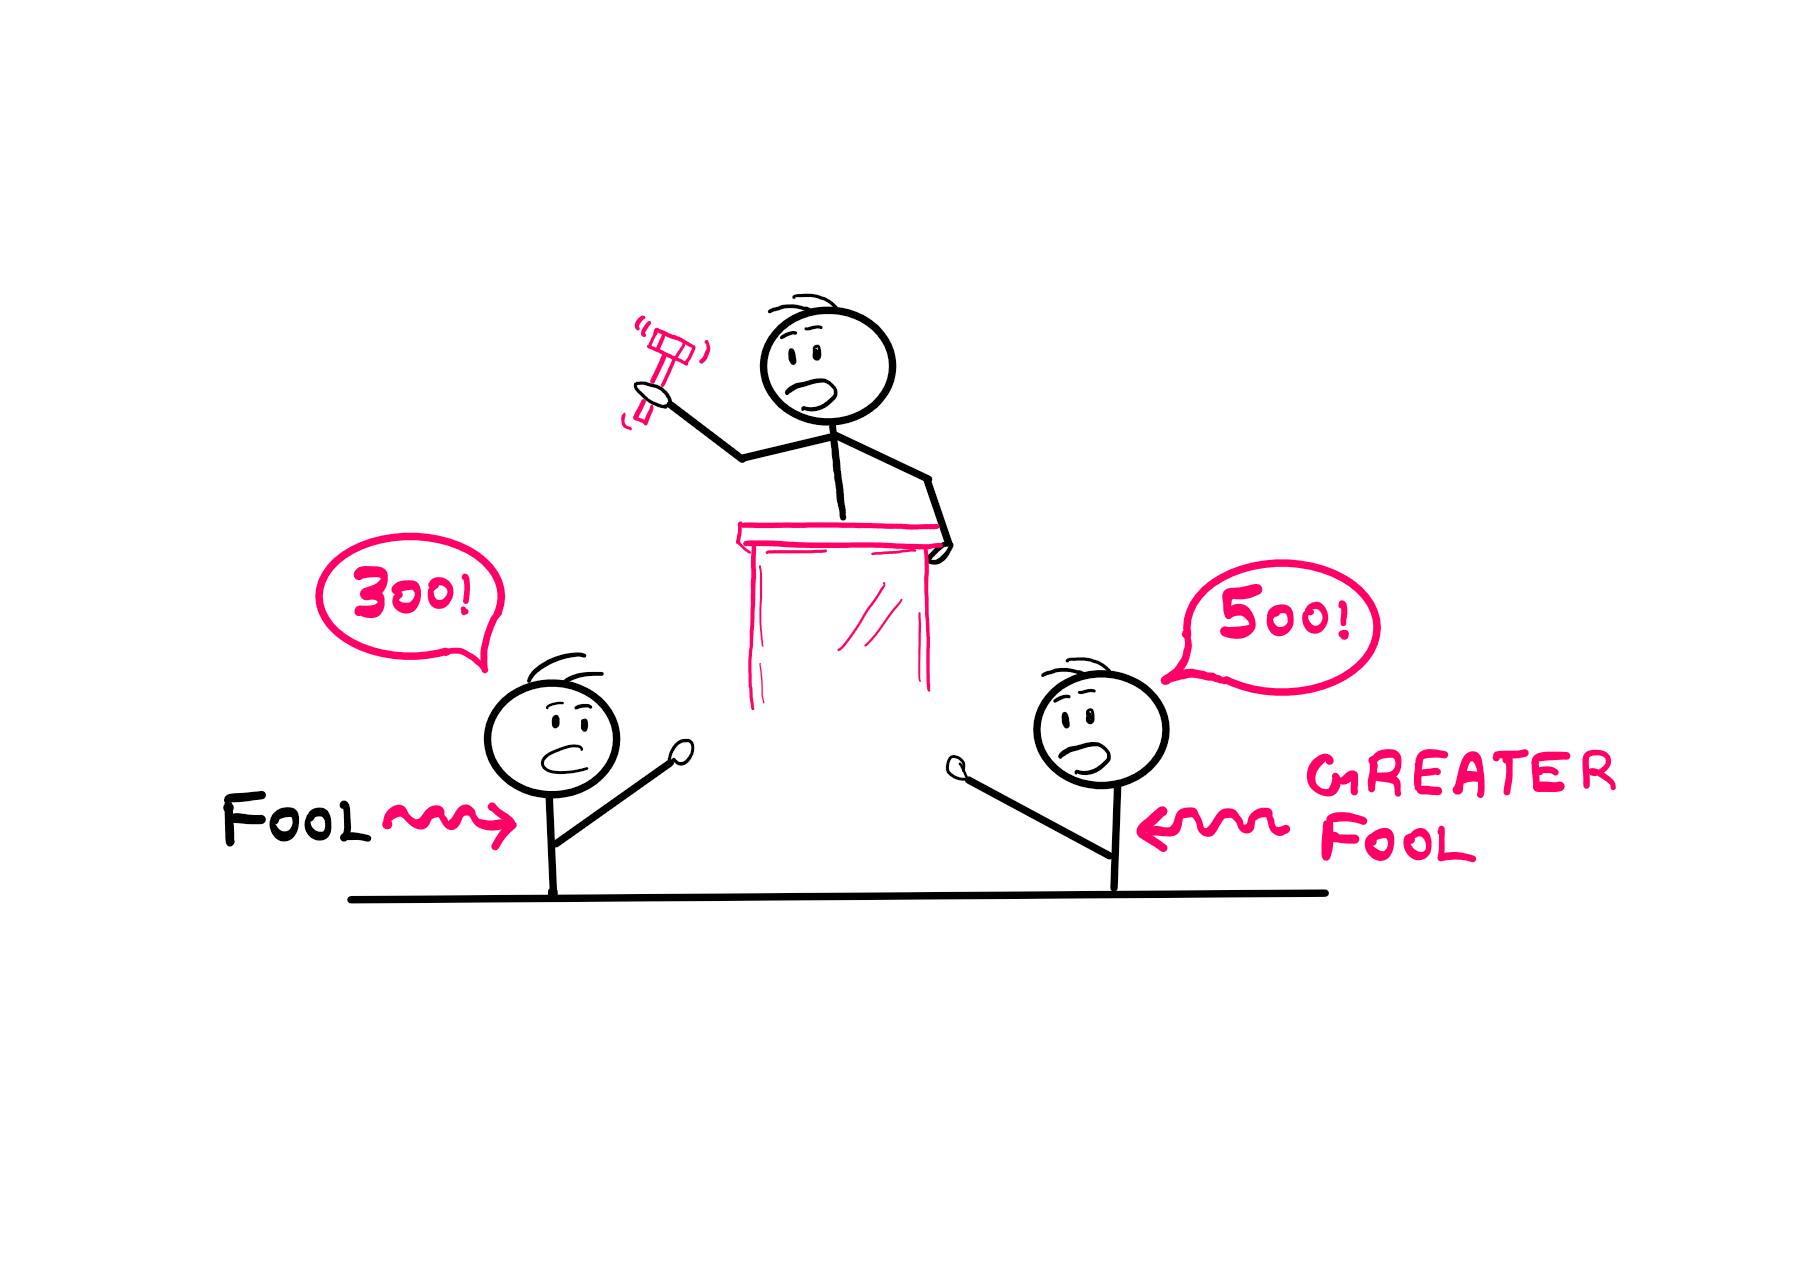 Greater Fool Theory - How Does It Really Work? - An illustration showing a stick figure at the centre organising an auction with a hammer and slamming it on a table. On the left is another stick figure shouting "300!" This stick figure is labelled "Fool". On the right is another stick figure shouting "500!" This stick figure is labelled "Greater Fool".